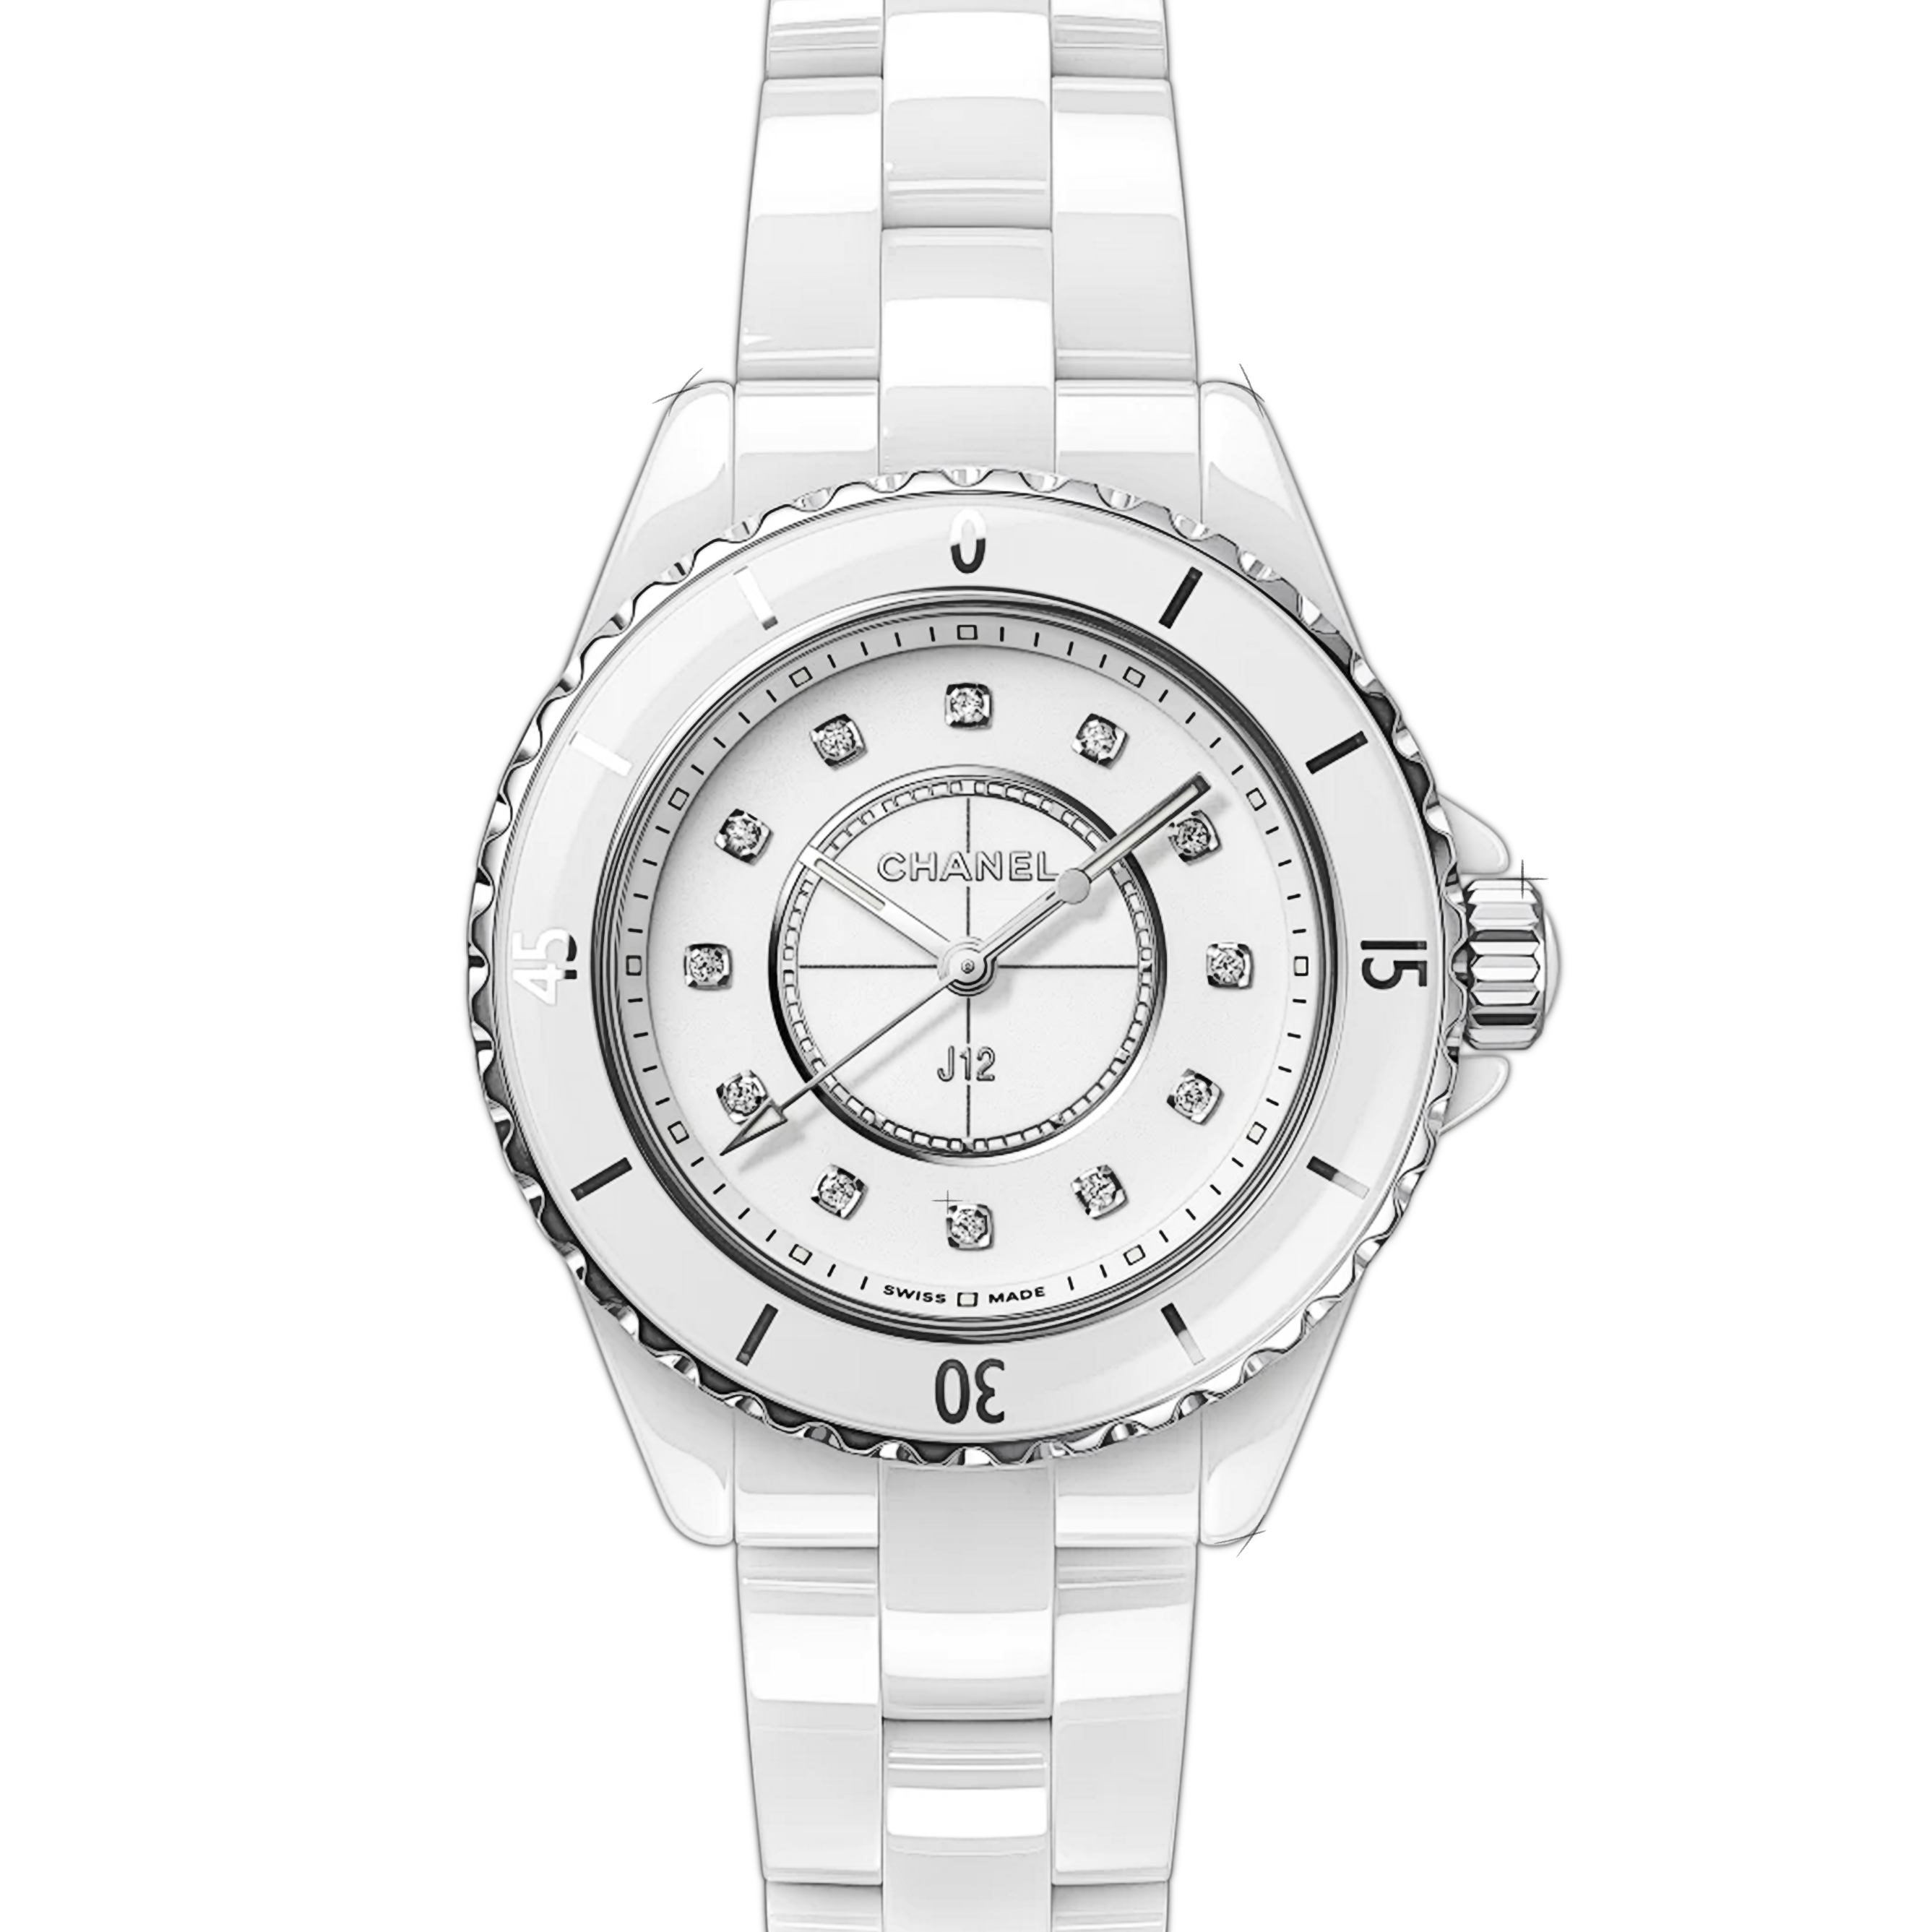 Chanel Watches at Discounted Prices  PrestigeTimecom